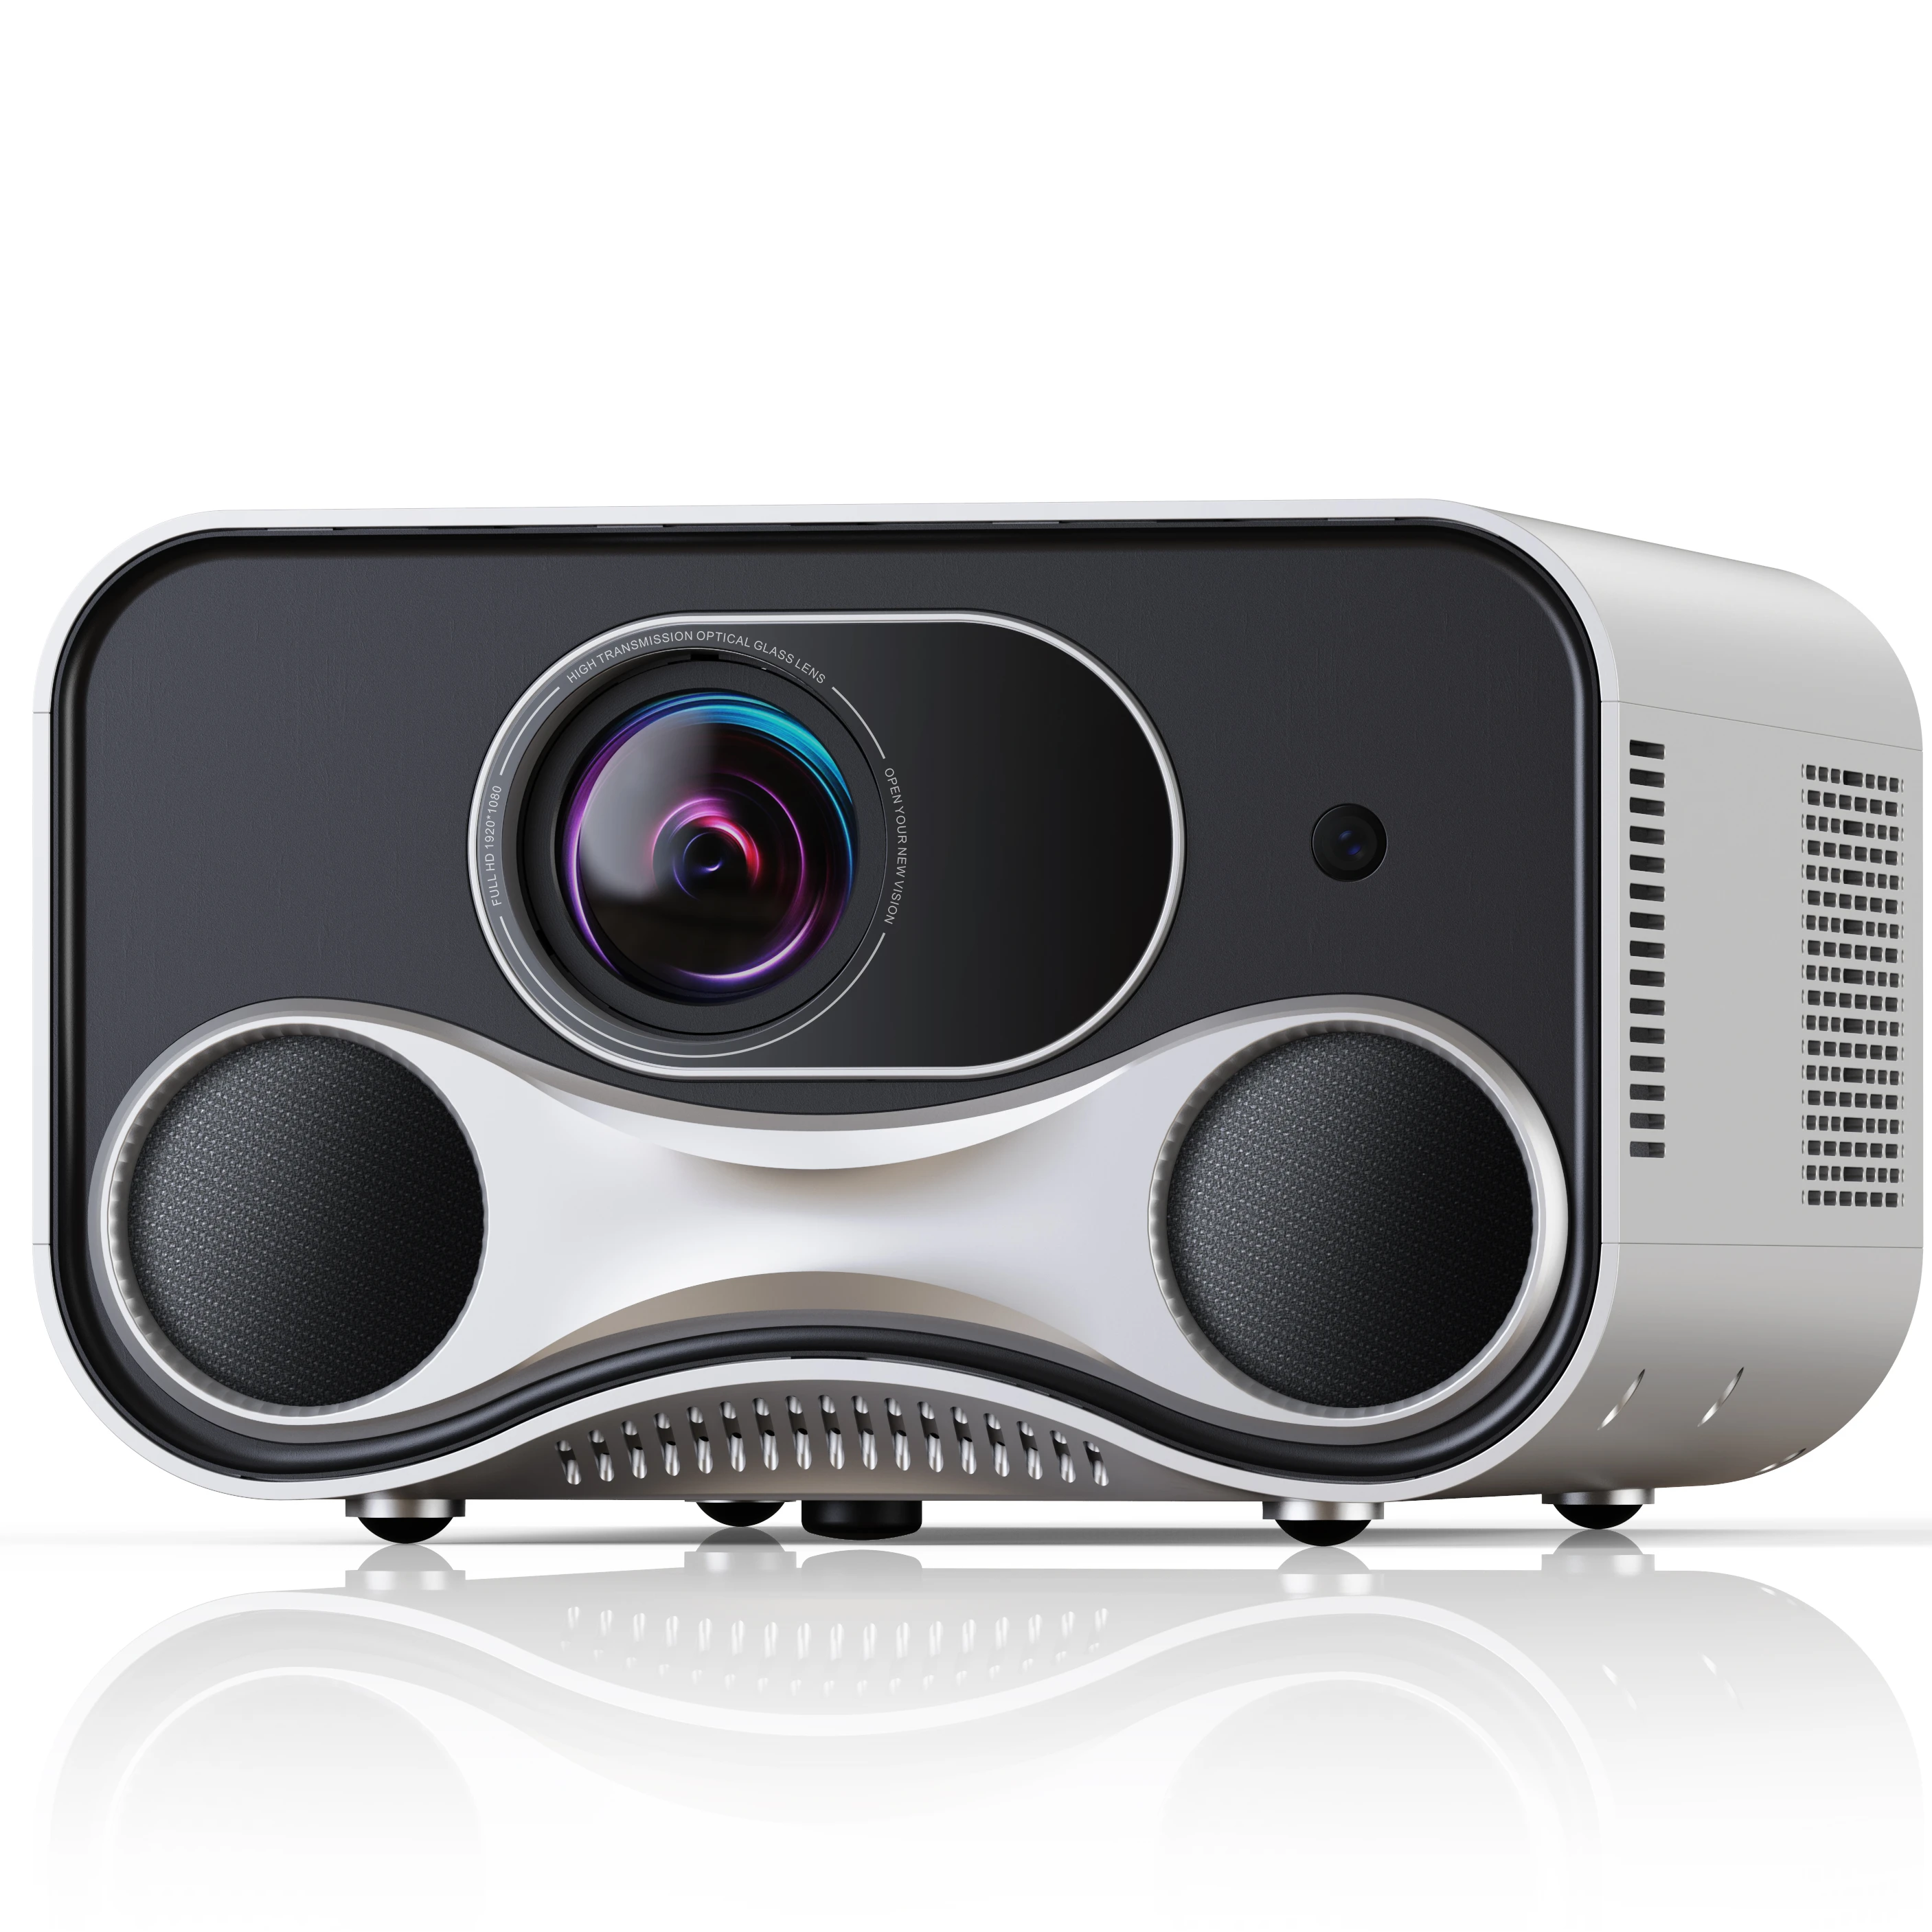 

2023 Latest J20 Android10.0 1080P 4k Auto focus and keystone Smart Proyector Mini DLP home cinema K25 K45 Projector